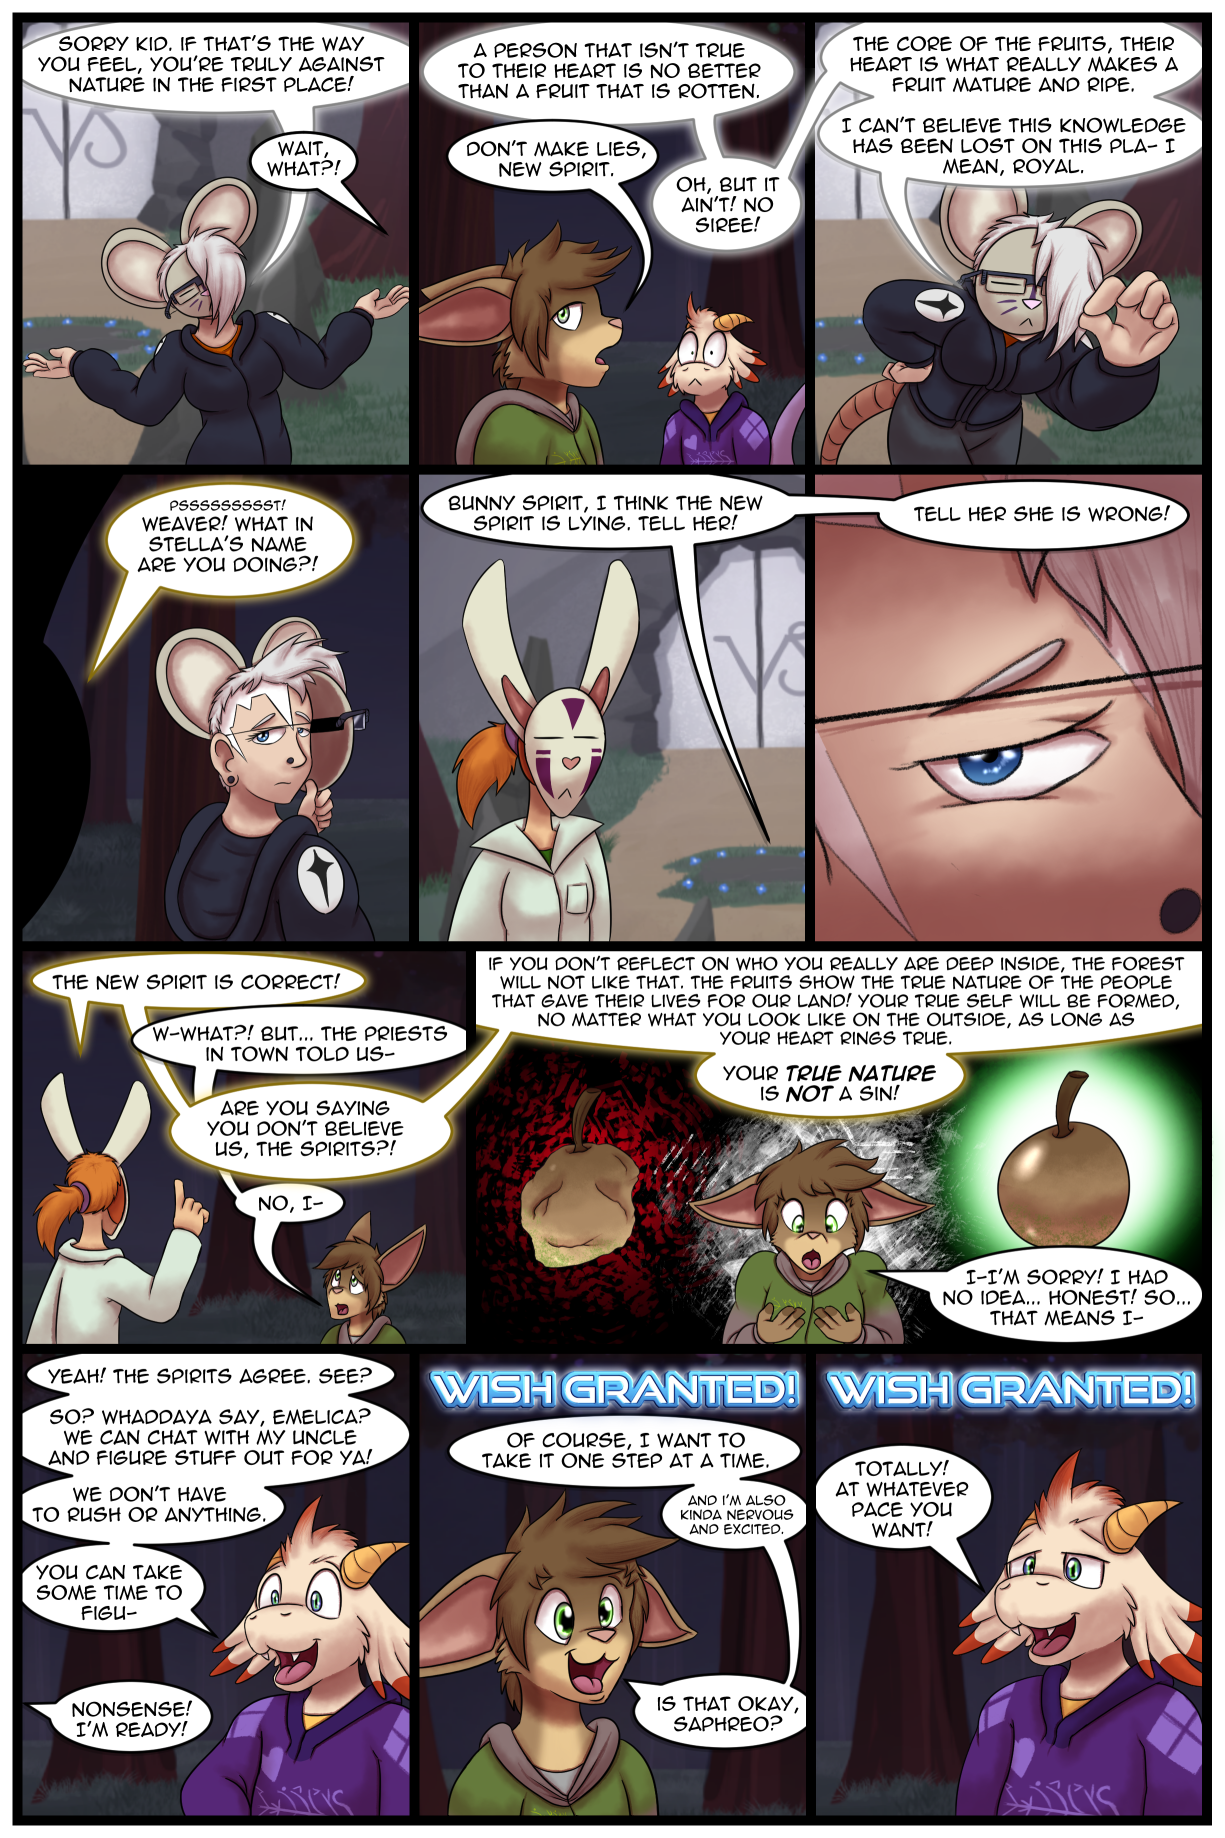 Ch5 Page 29 – True Nature